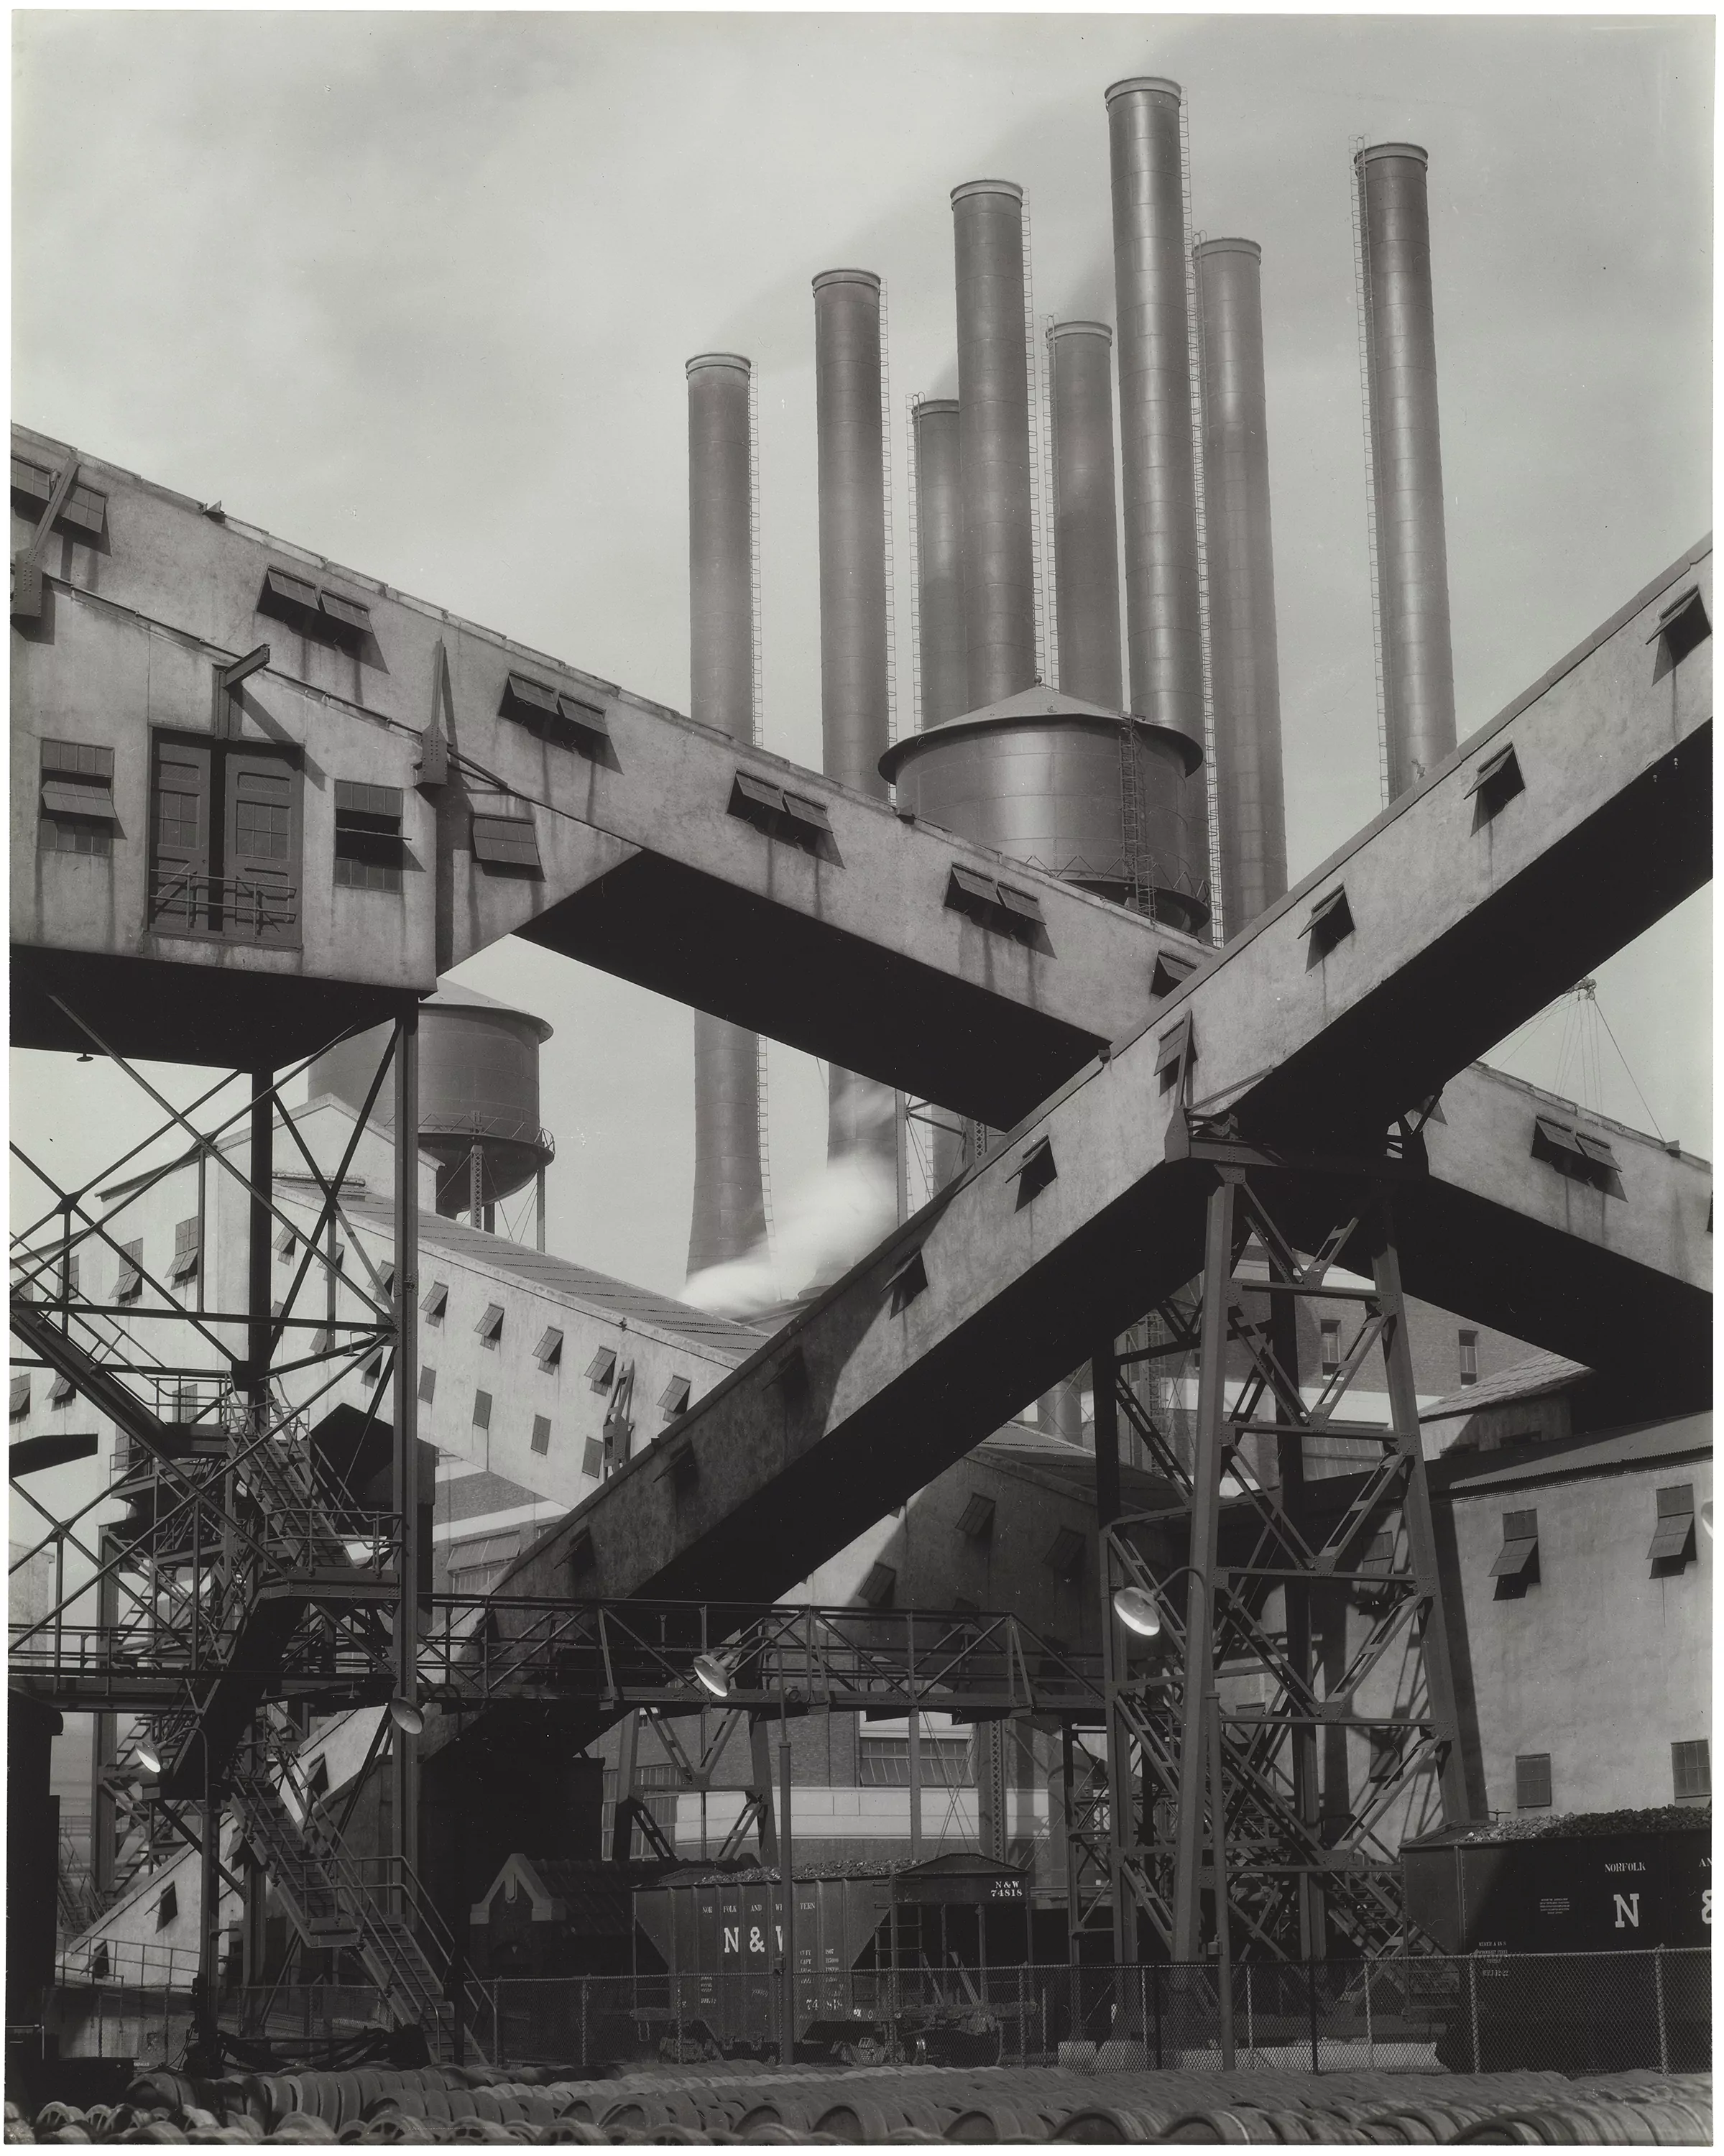 Criss-Crossed Conveyors, River Rouge Plant, Ford Motor Company, Charles Sheeler